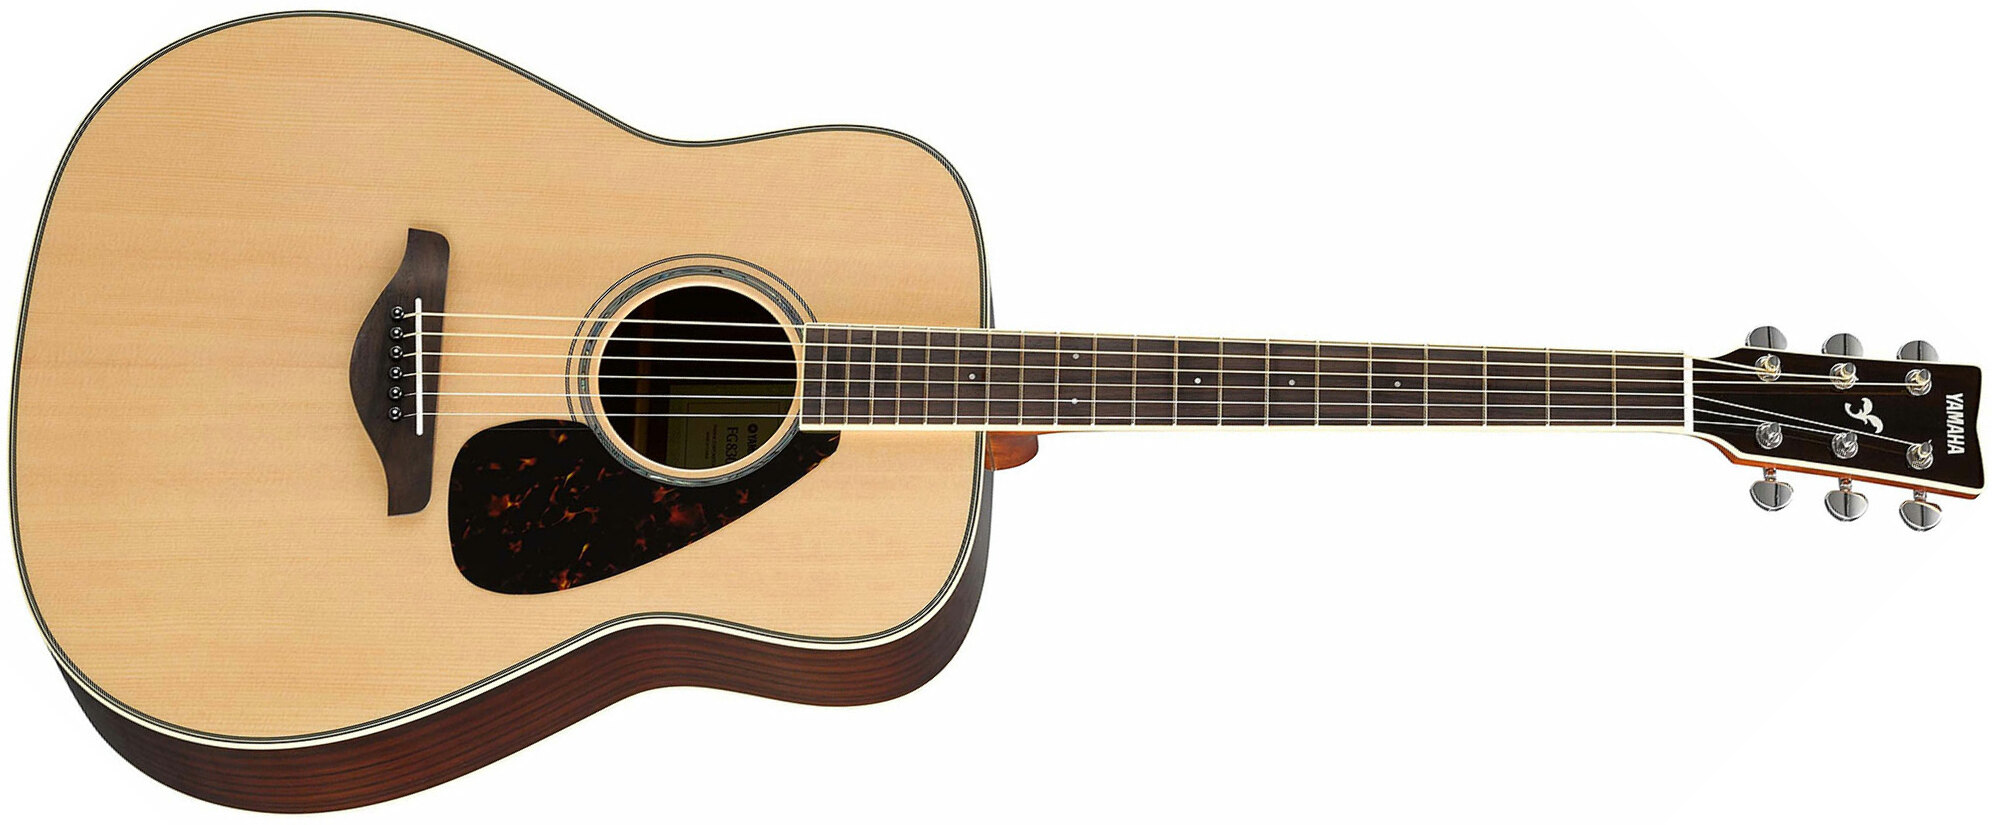 Yamaha Fg830 Nt Dreadnought Epicea Palissandre Rw 2016 - Natural Gloss - Westerngitarre & electro - Main picture